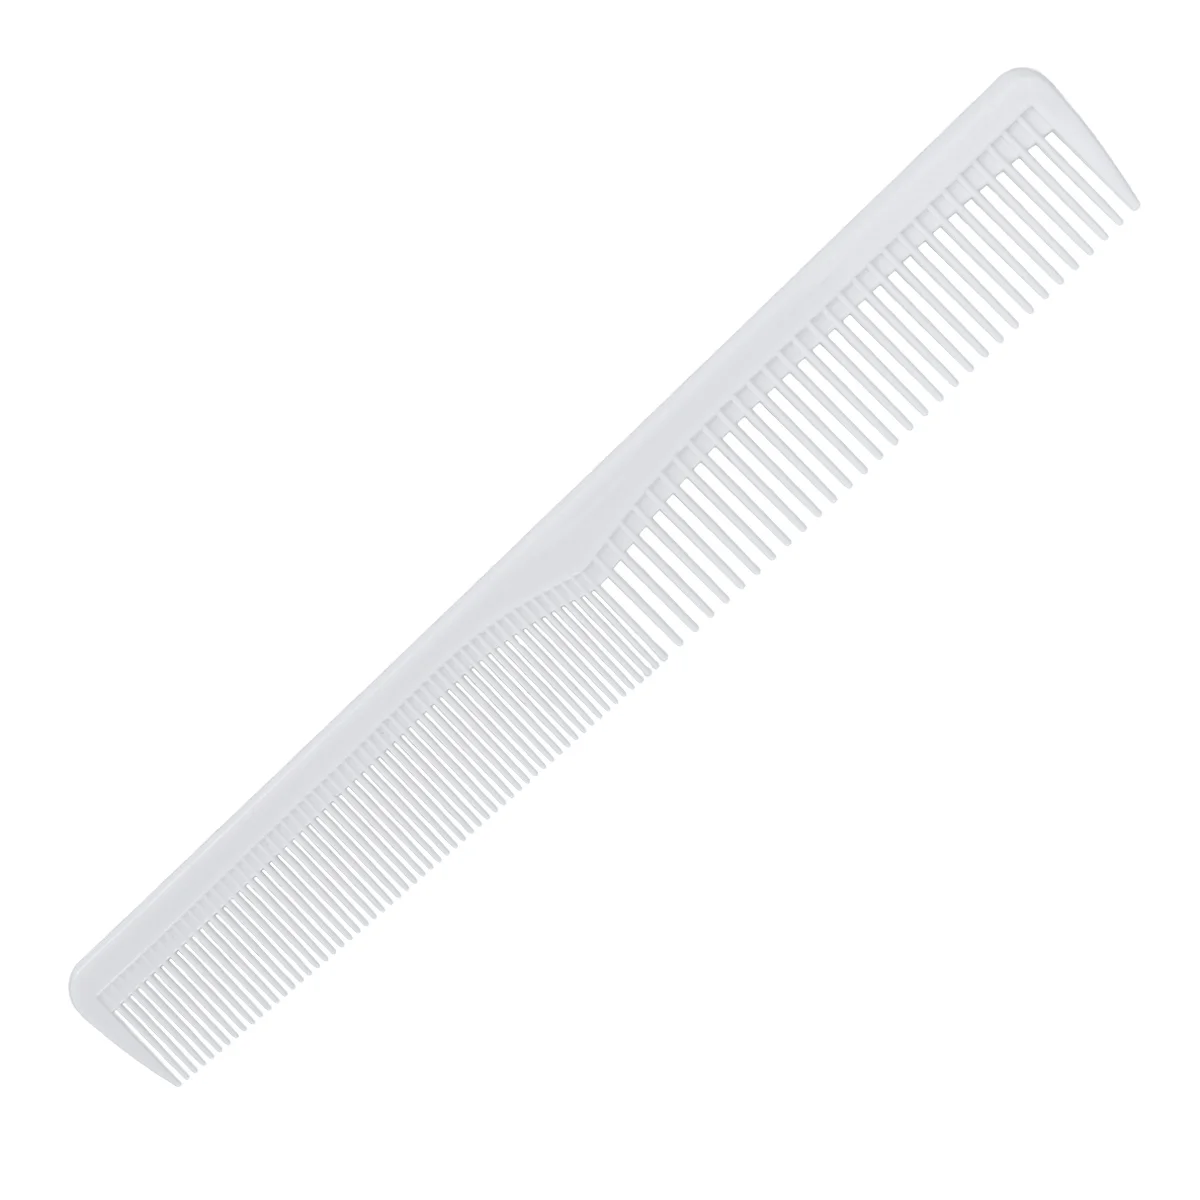 

Practical Compact Plastic Anti-Static Tooth Design Hairdressing Double Side Pettine Hair Combs Hairbrush For Salon Home Hotel